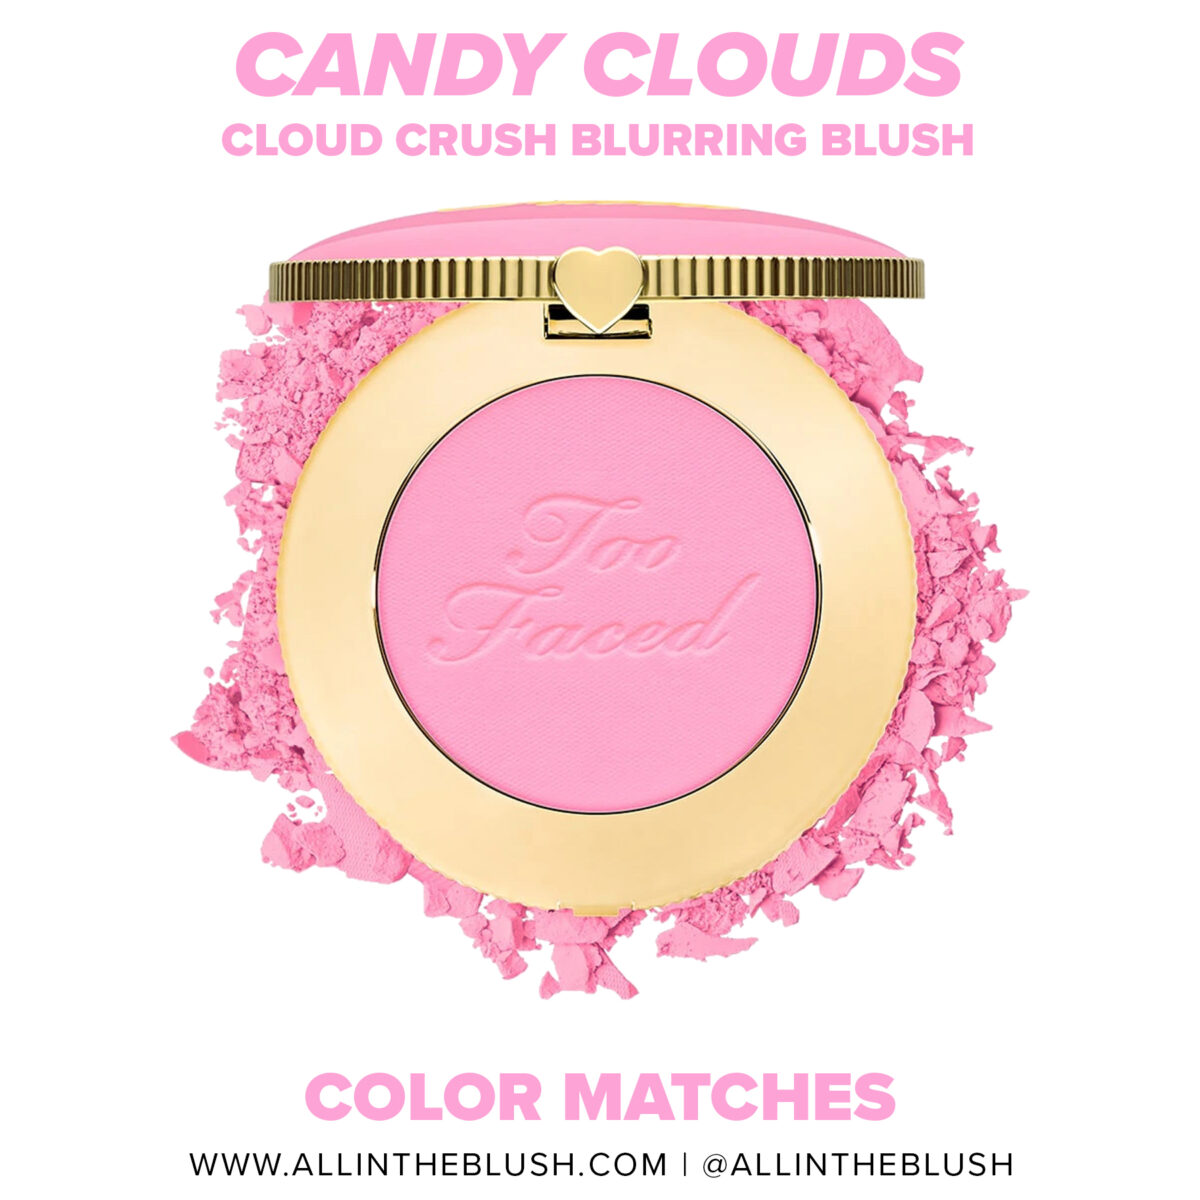 Too Faced Candy Clouds Cloud Crush Blurring Blush Dupes